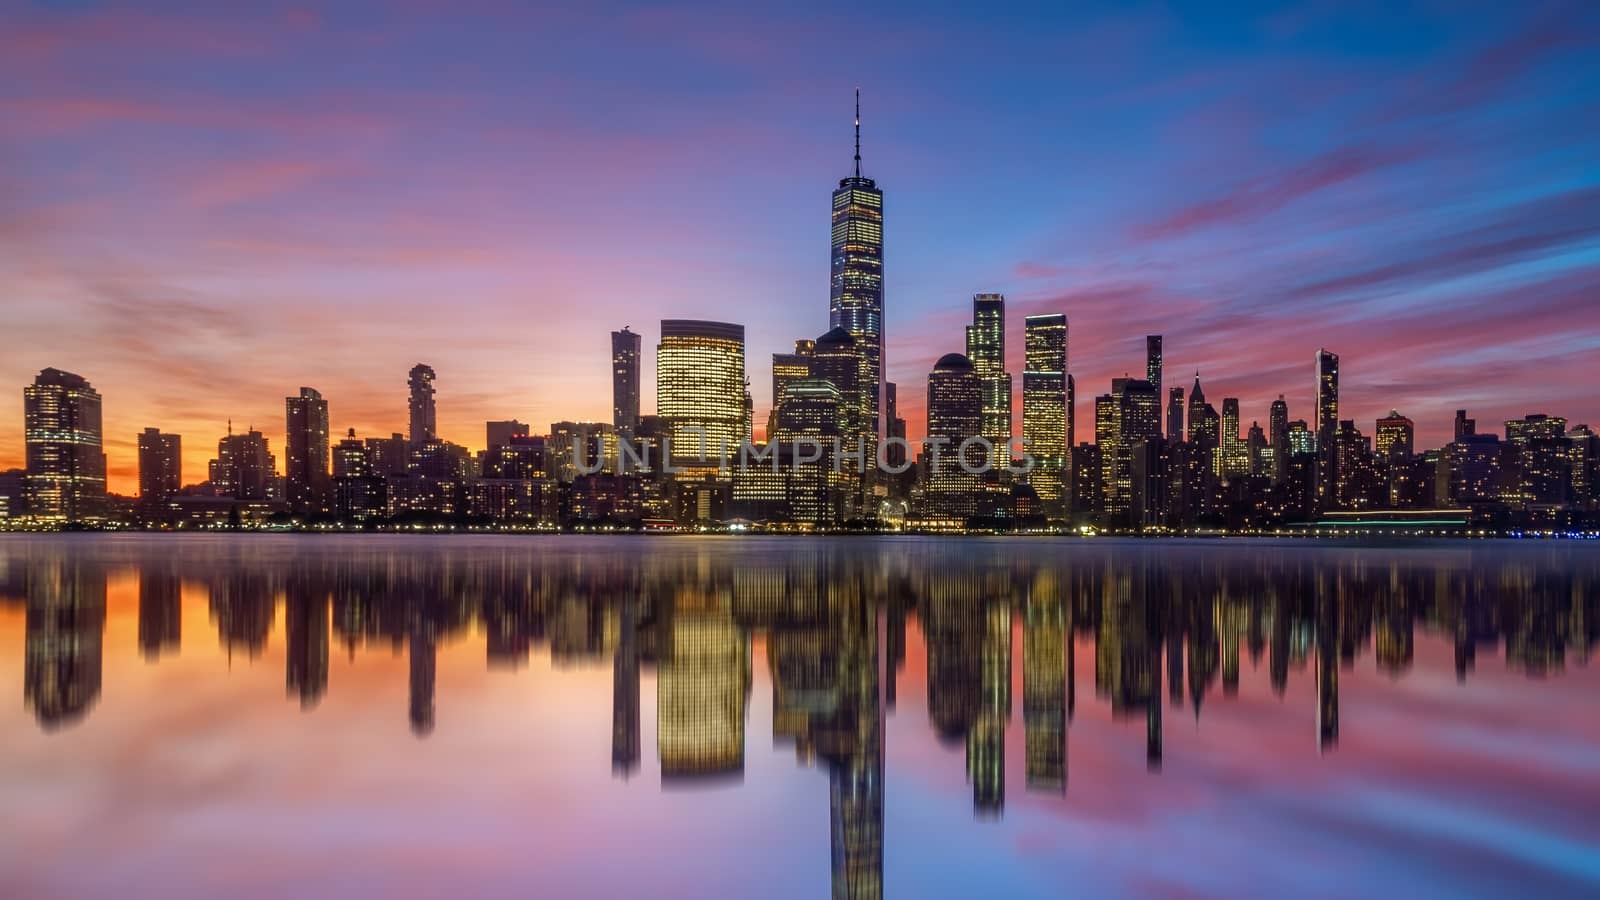 New York City downtown skyline at sunset - beautiful cityscape in USA